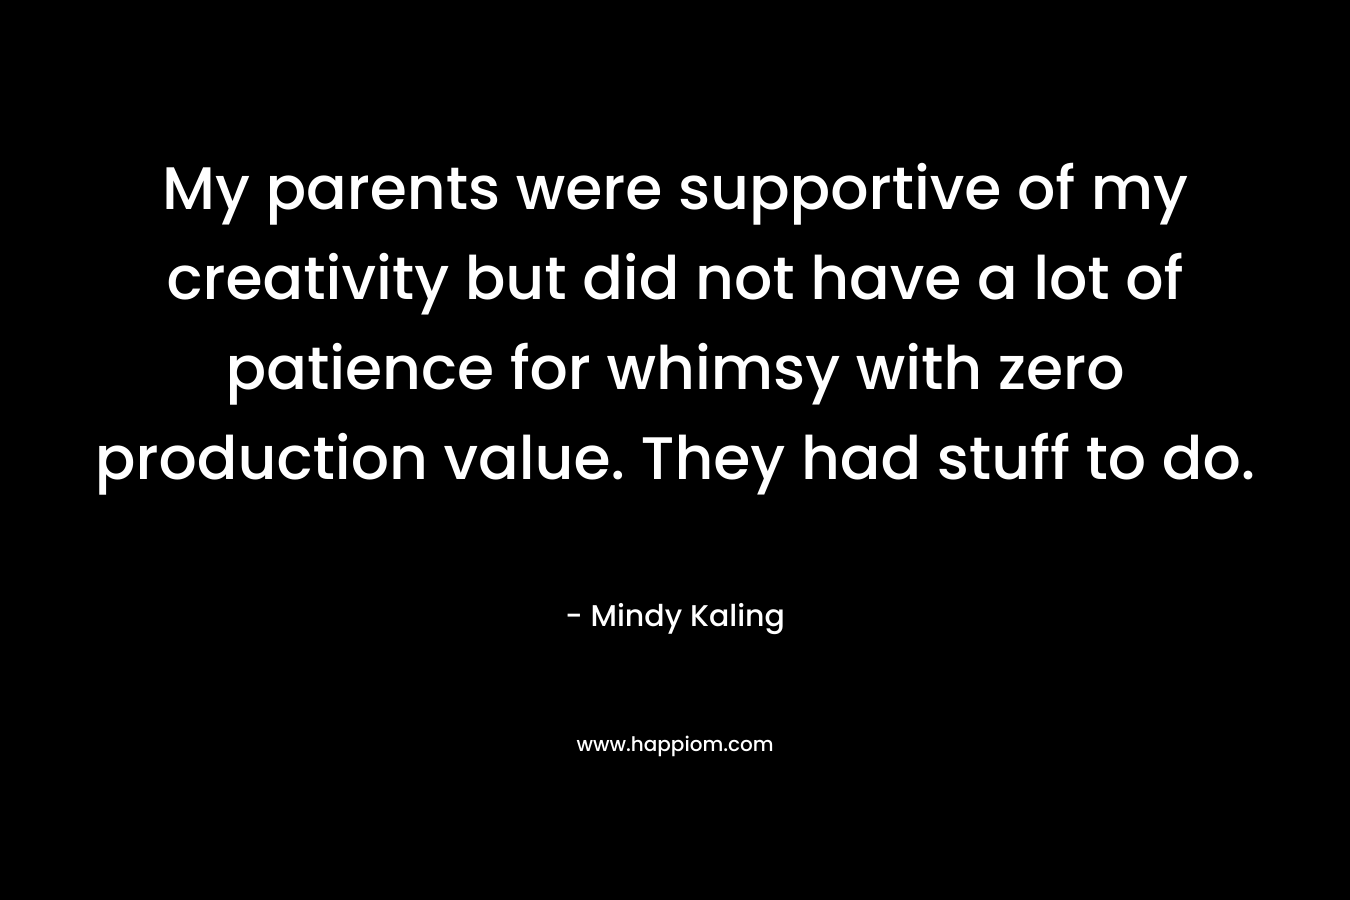 My parents were supportive of my creativity but did not have a lot of patience for whimsy with zero production value. They had stuff to do. – Mindy Kaling